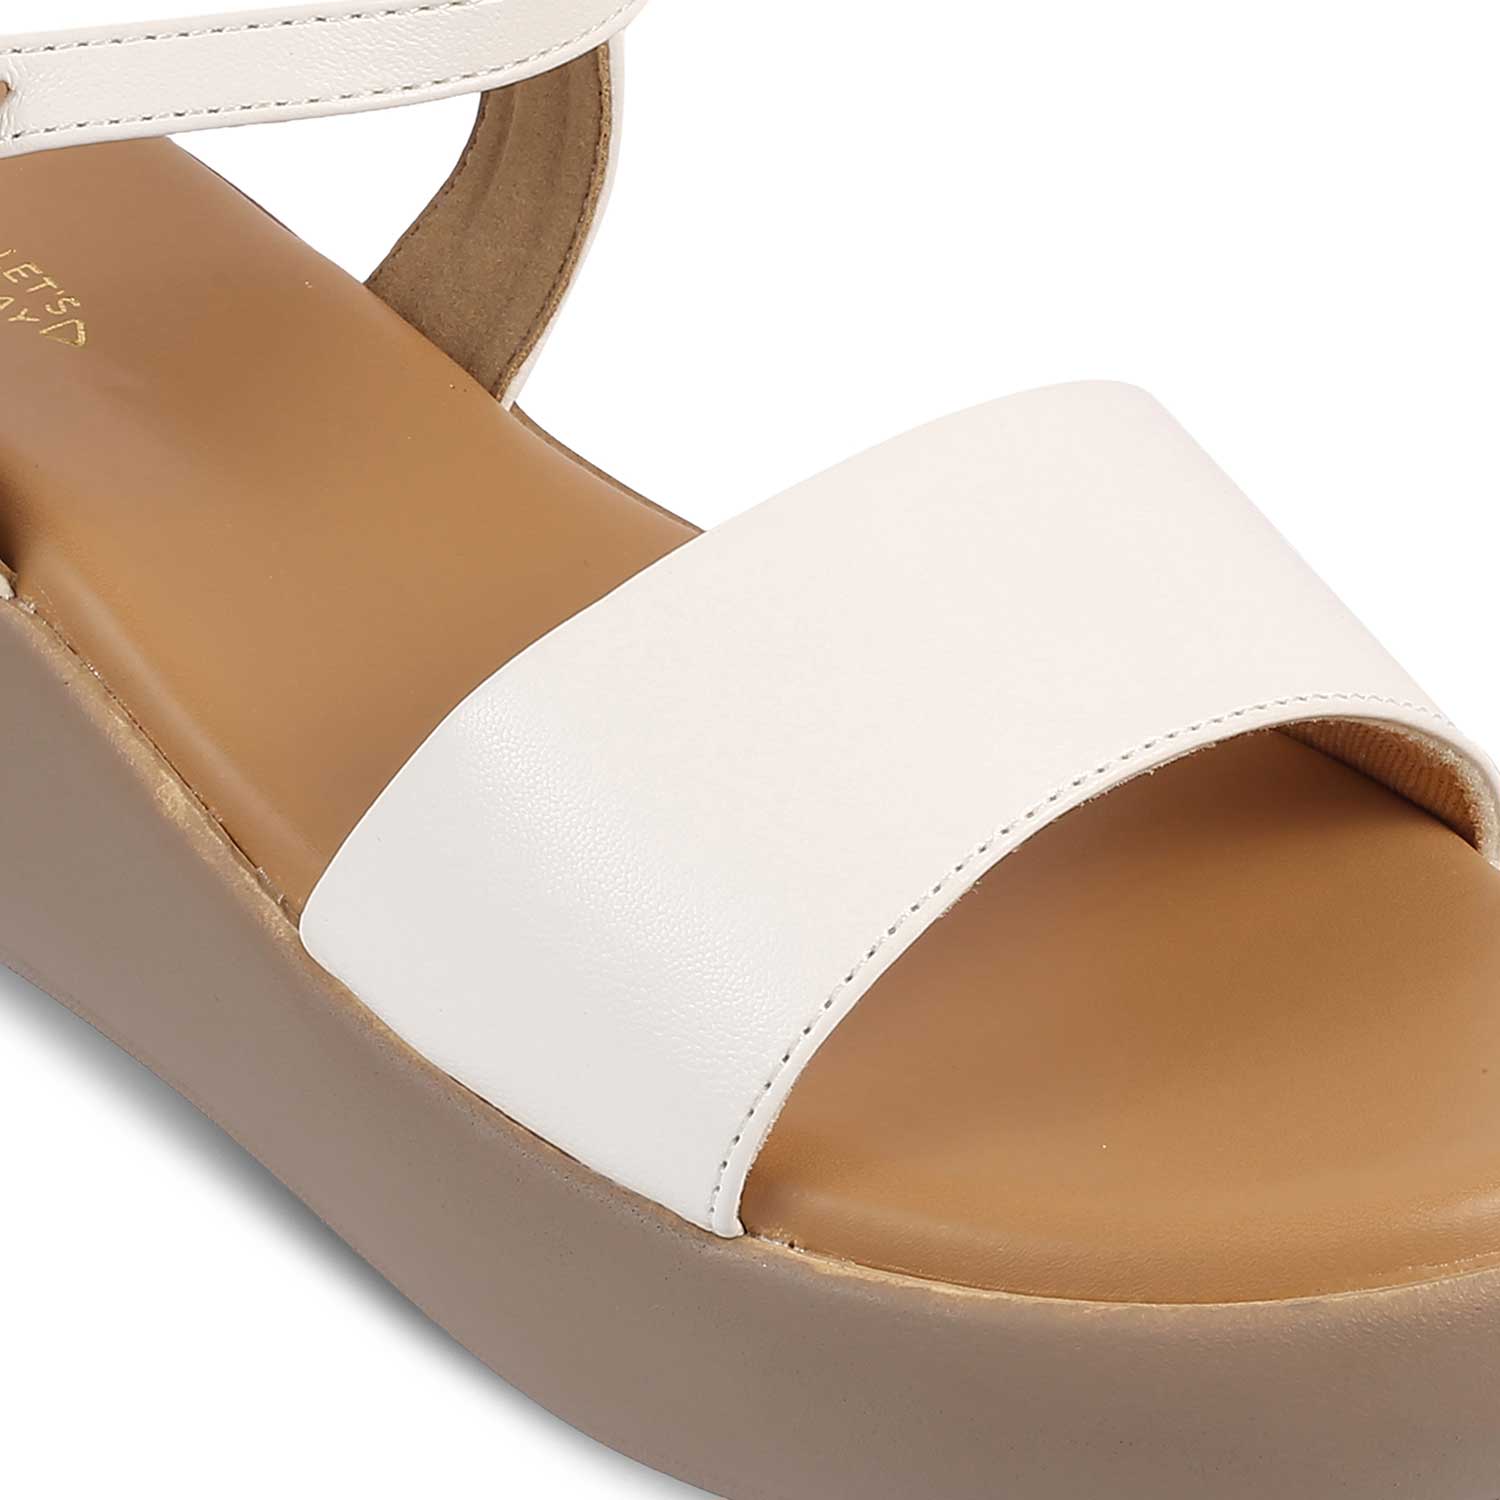 The Simpl White Women's Dress Wedge Sandals Tresmode